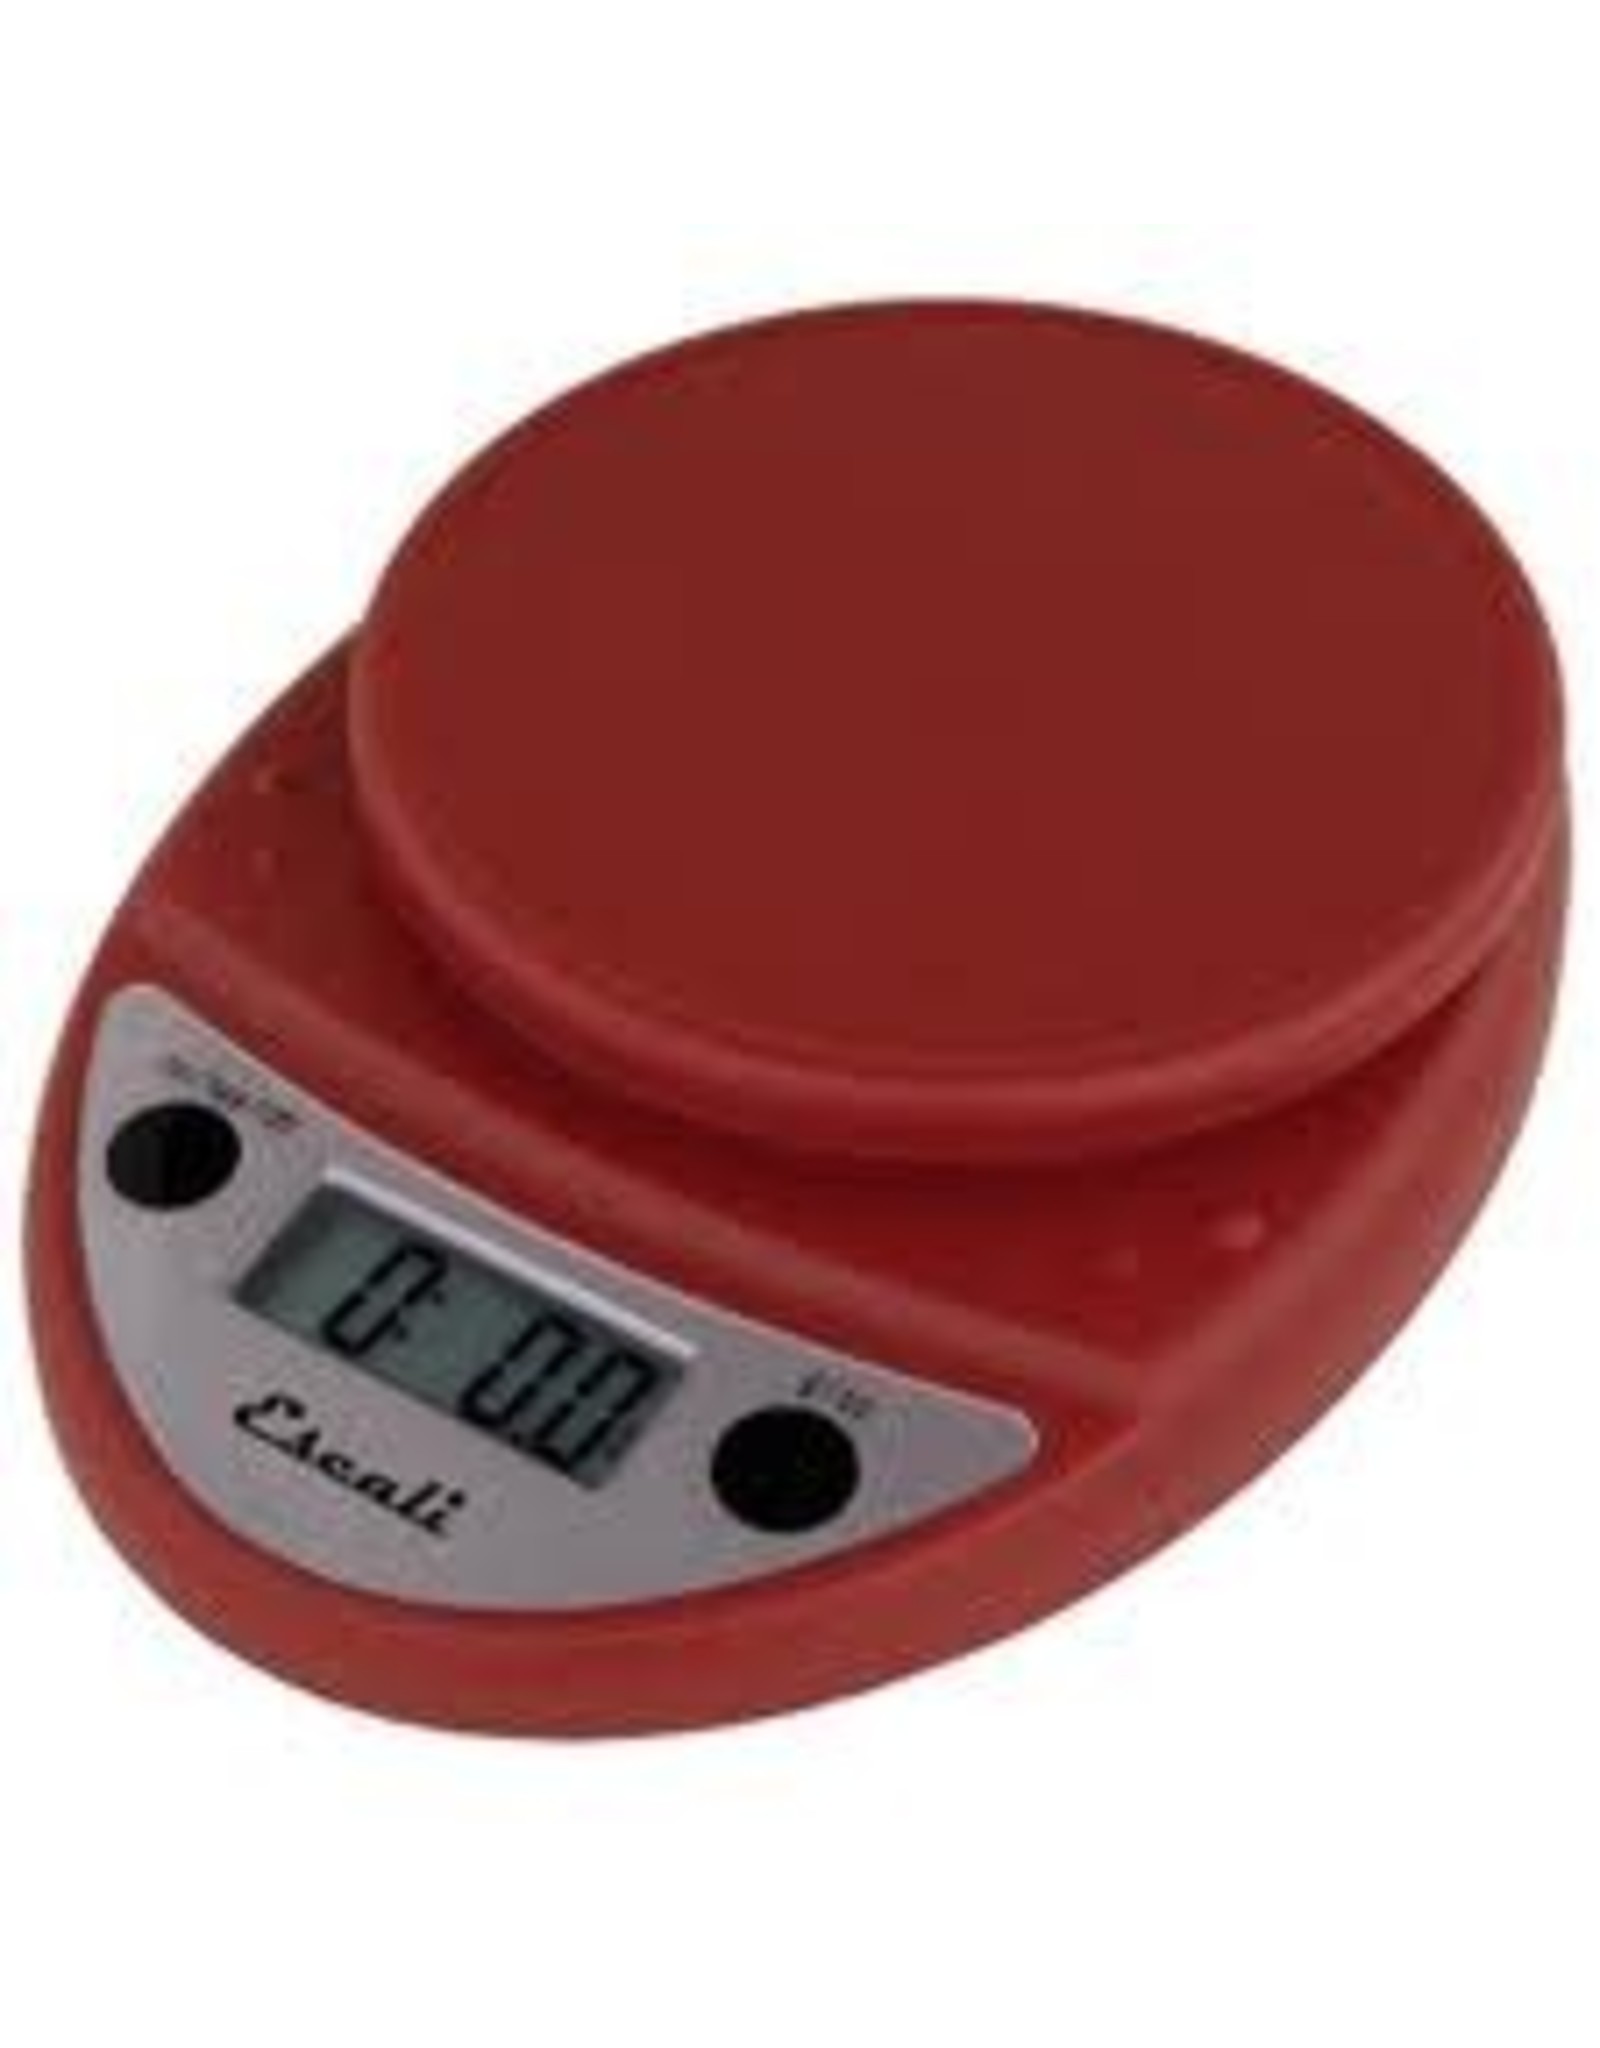 PRIMO DIGITAL SCALE SOFT RED